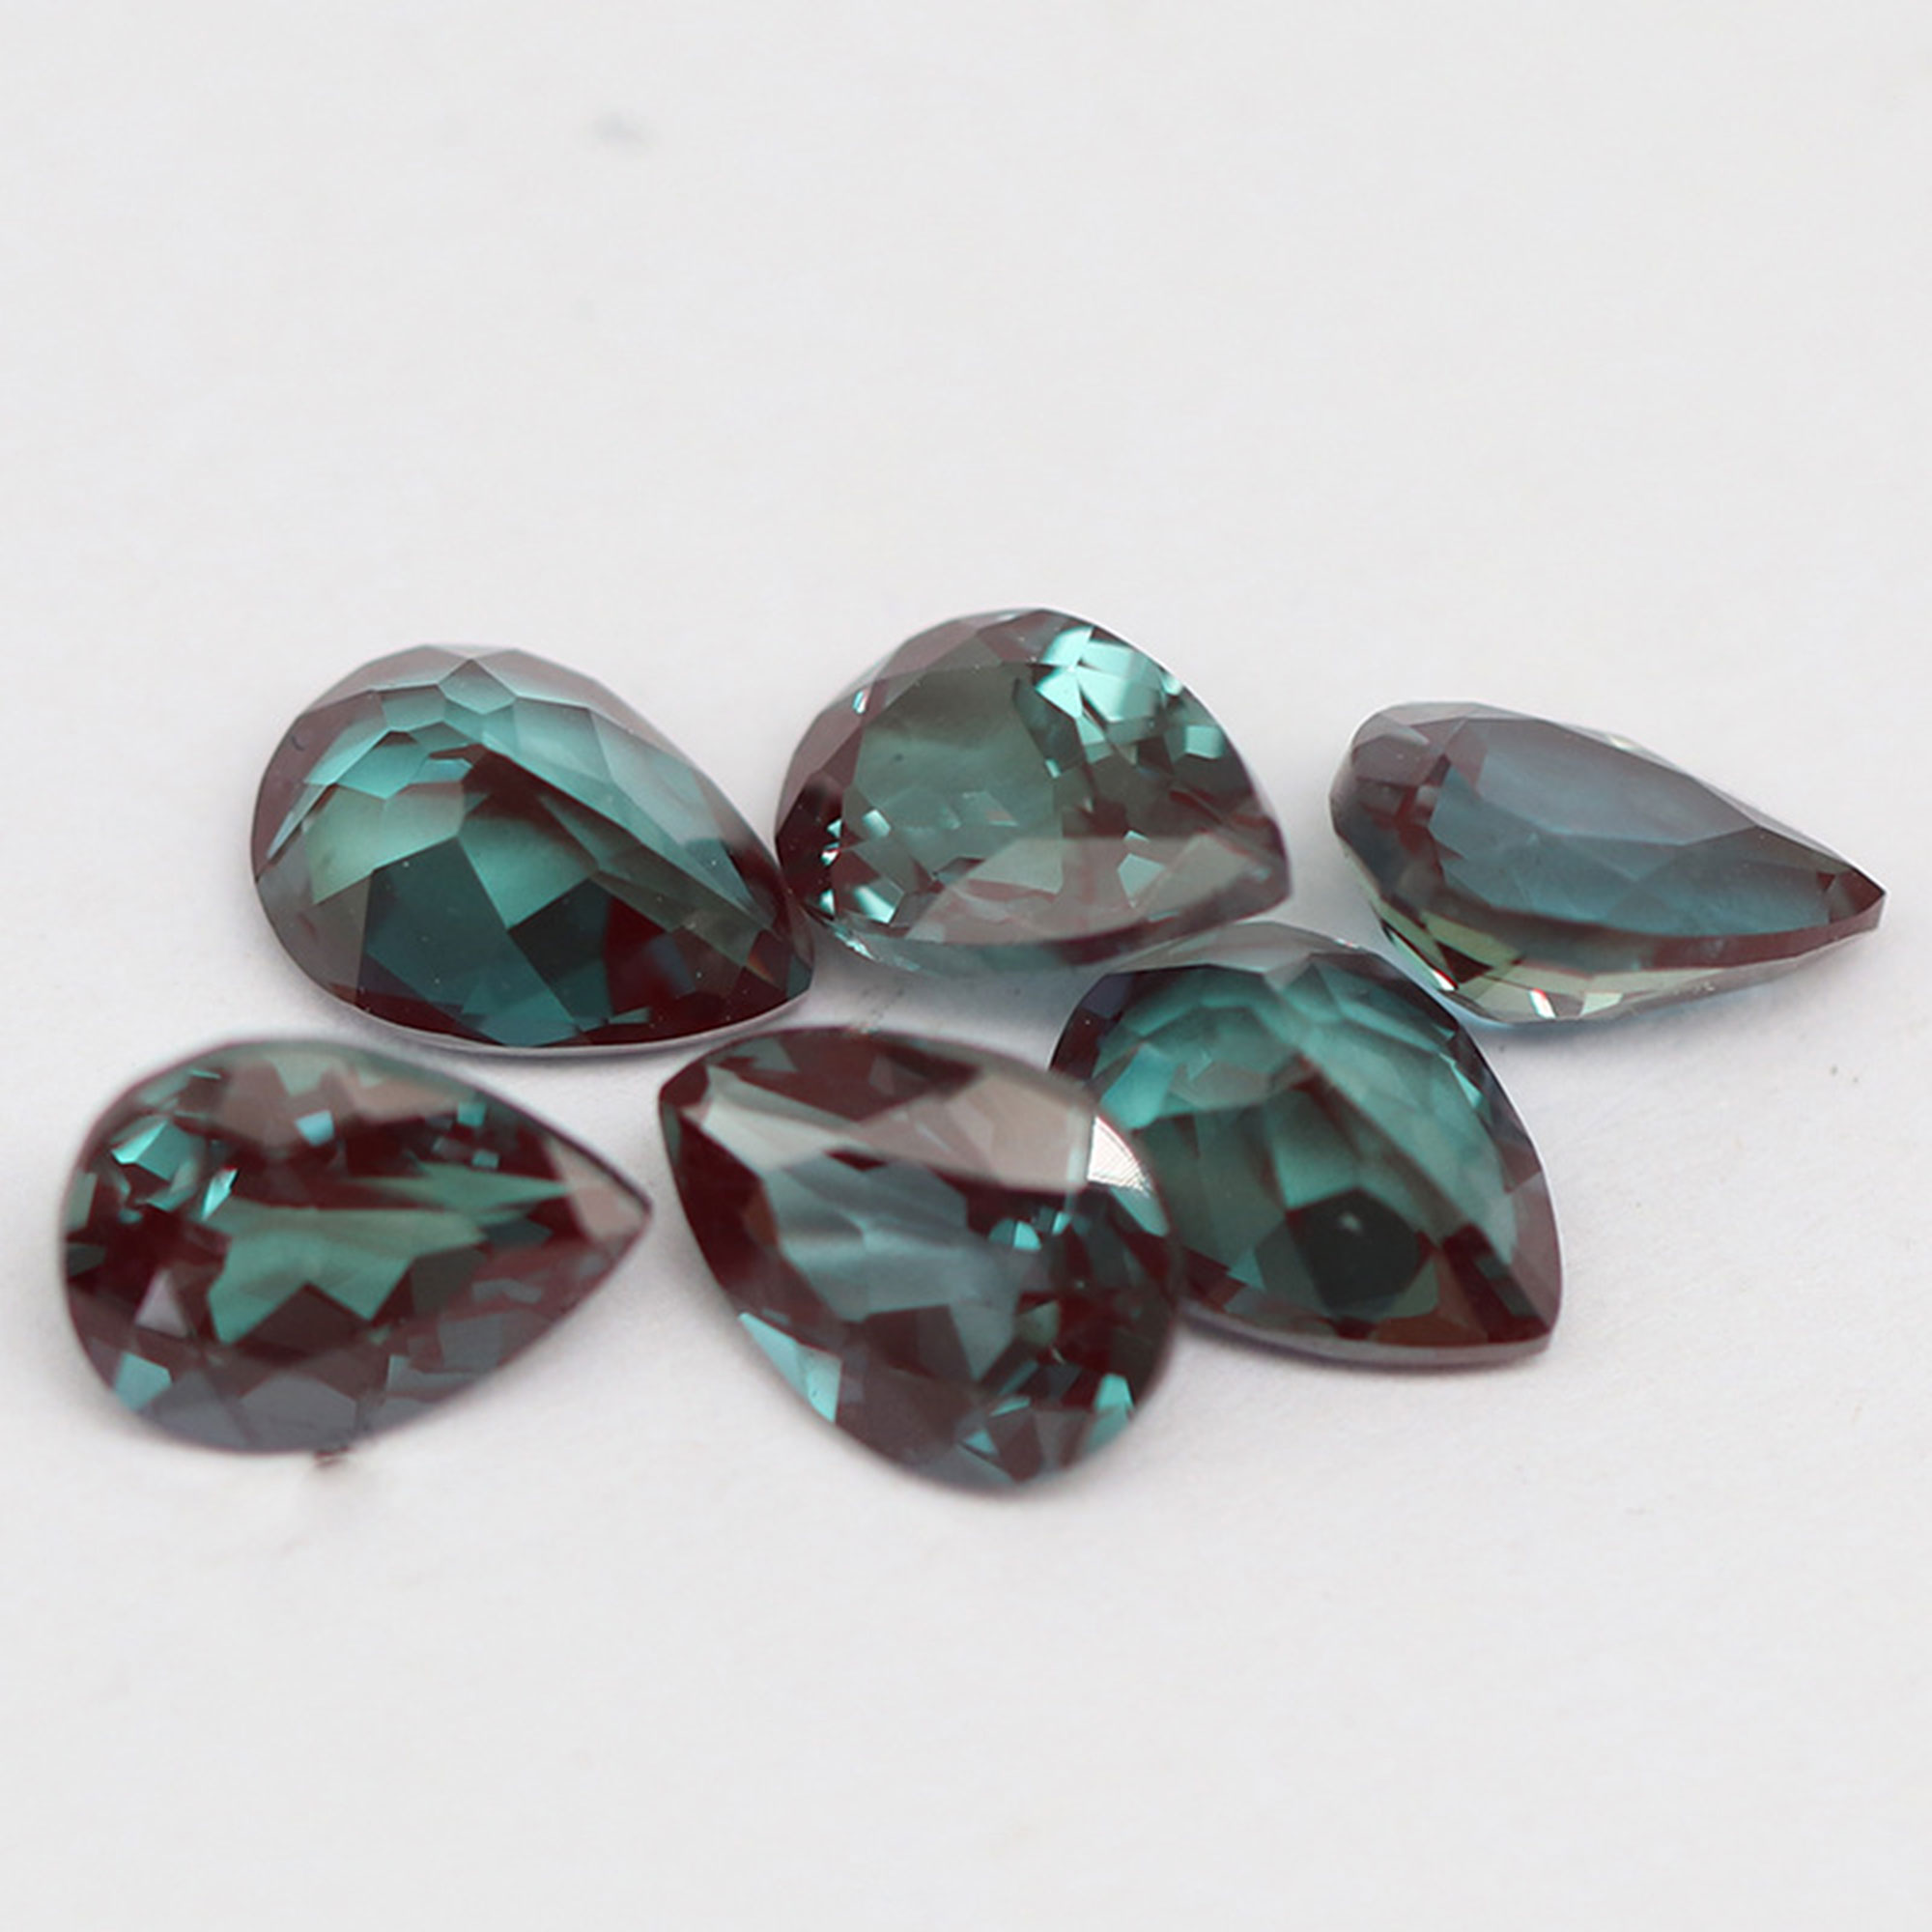 Lab Grown Alexandrite Faceted Gemstone,Pear Color Change Stone,June Birthstone,DIY Loose Gemstone Supplies 4150027 - Click Image to Close